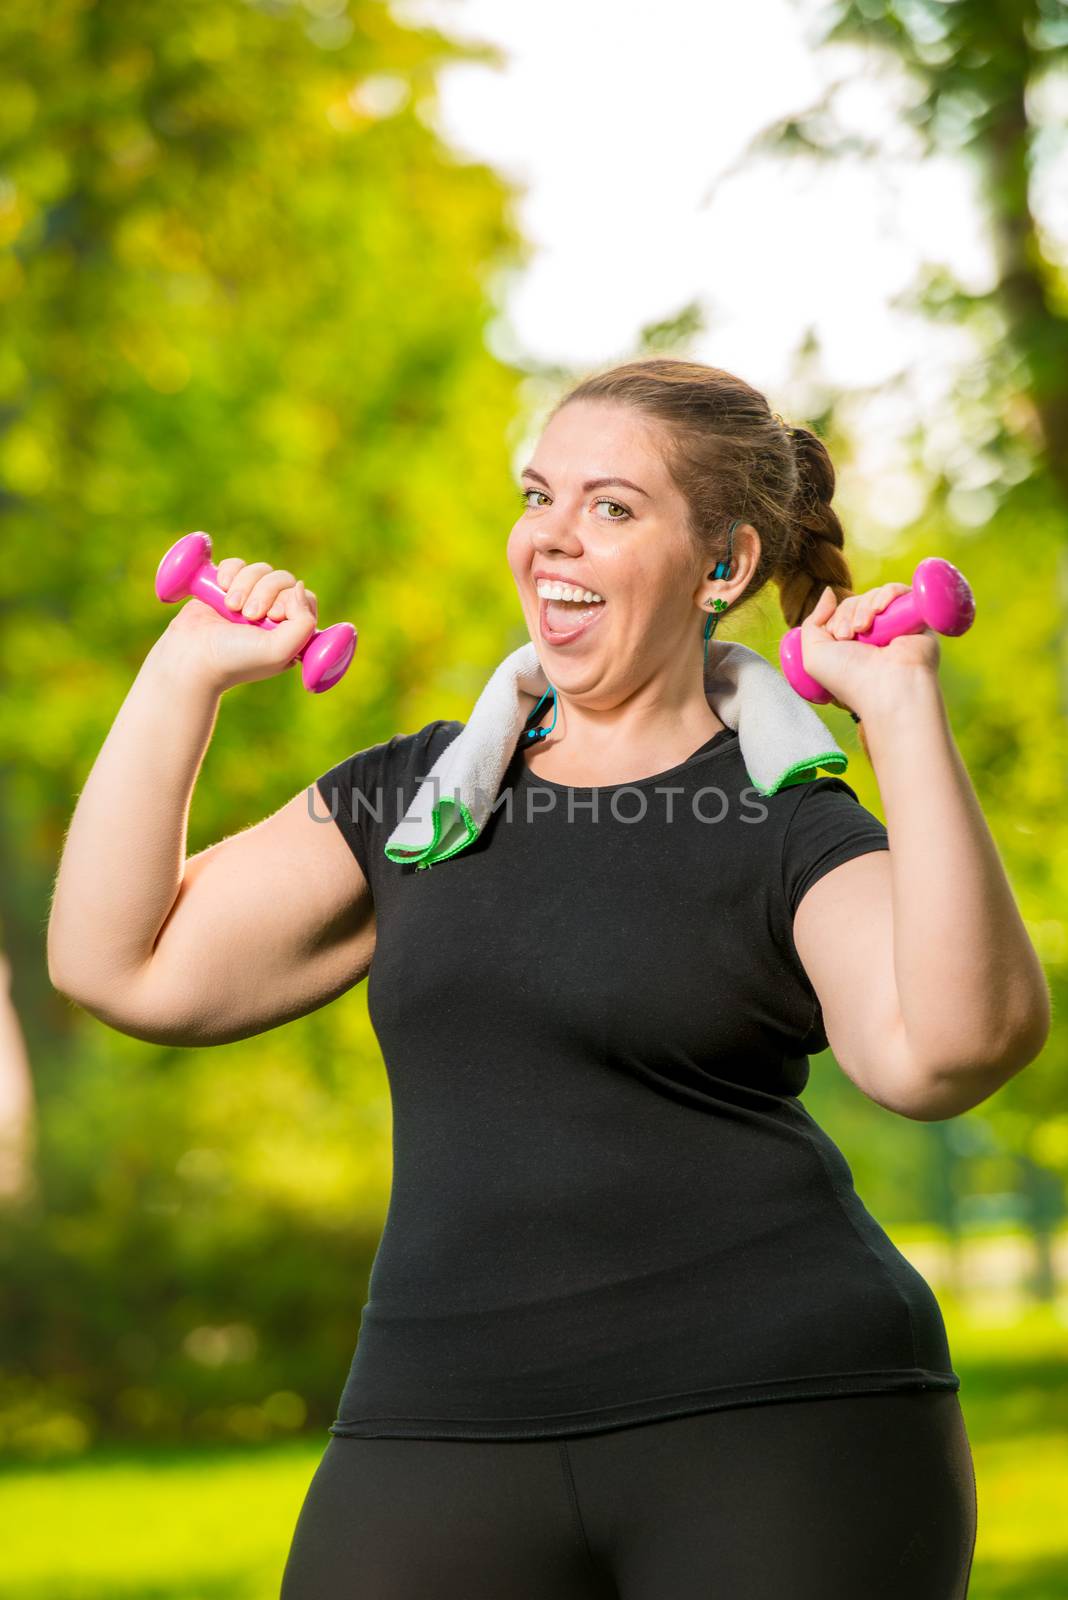 tending to harmony woman plus size without complexes deals with dumbbells in a summer park